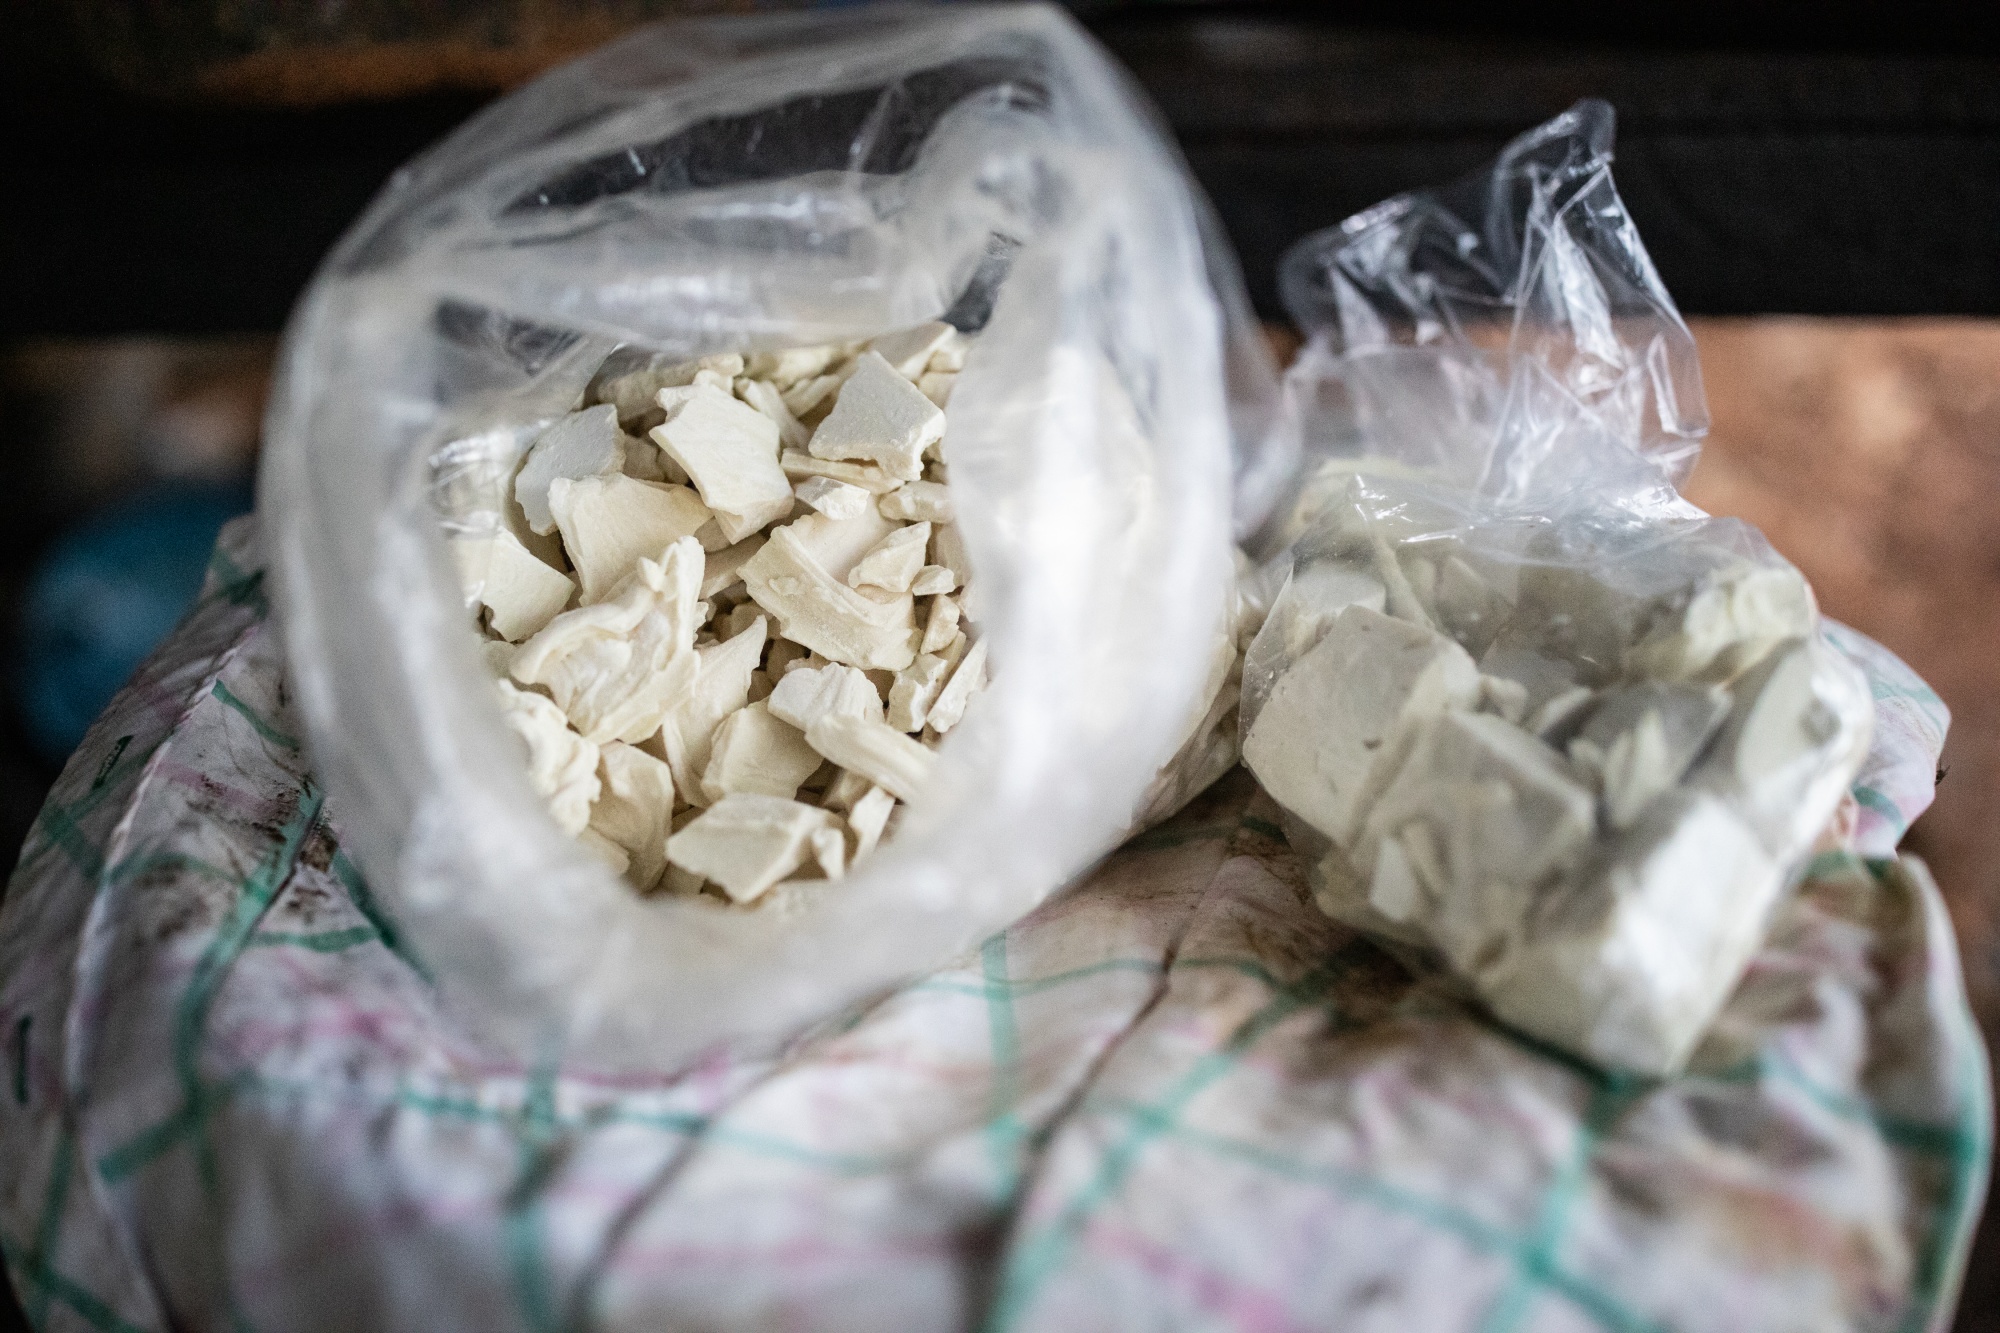 Colombia Cocaine Output Soars to Record as Drug Hits New Markets